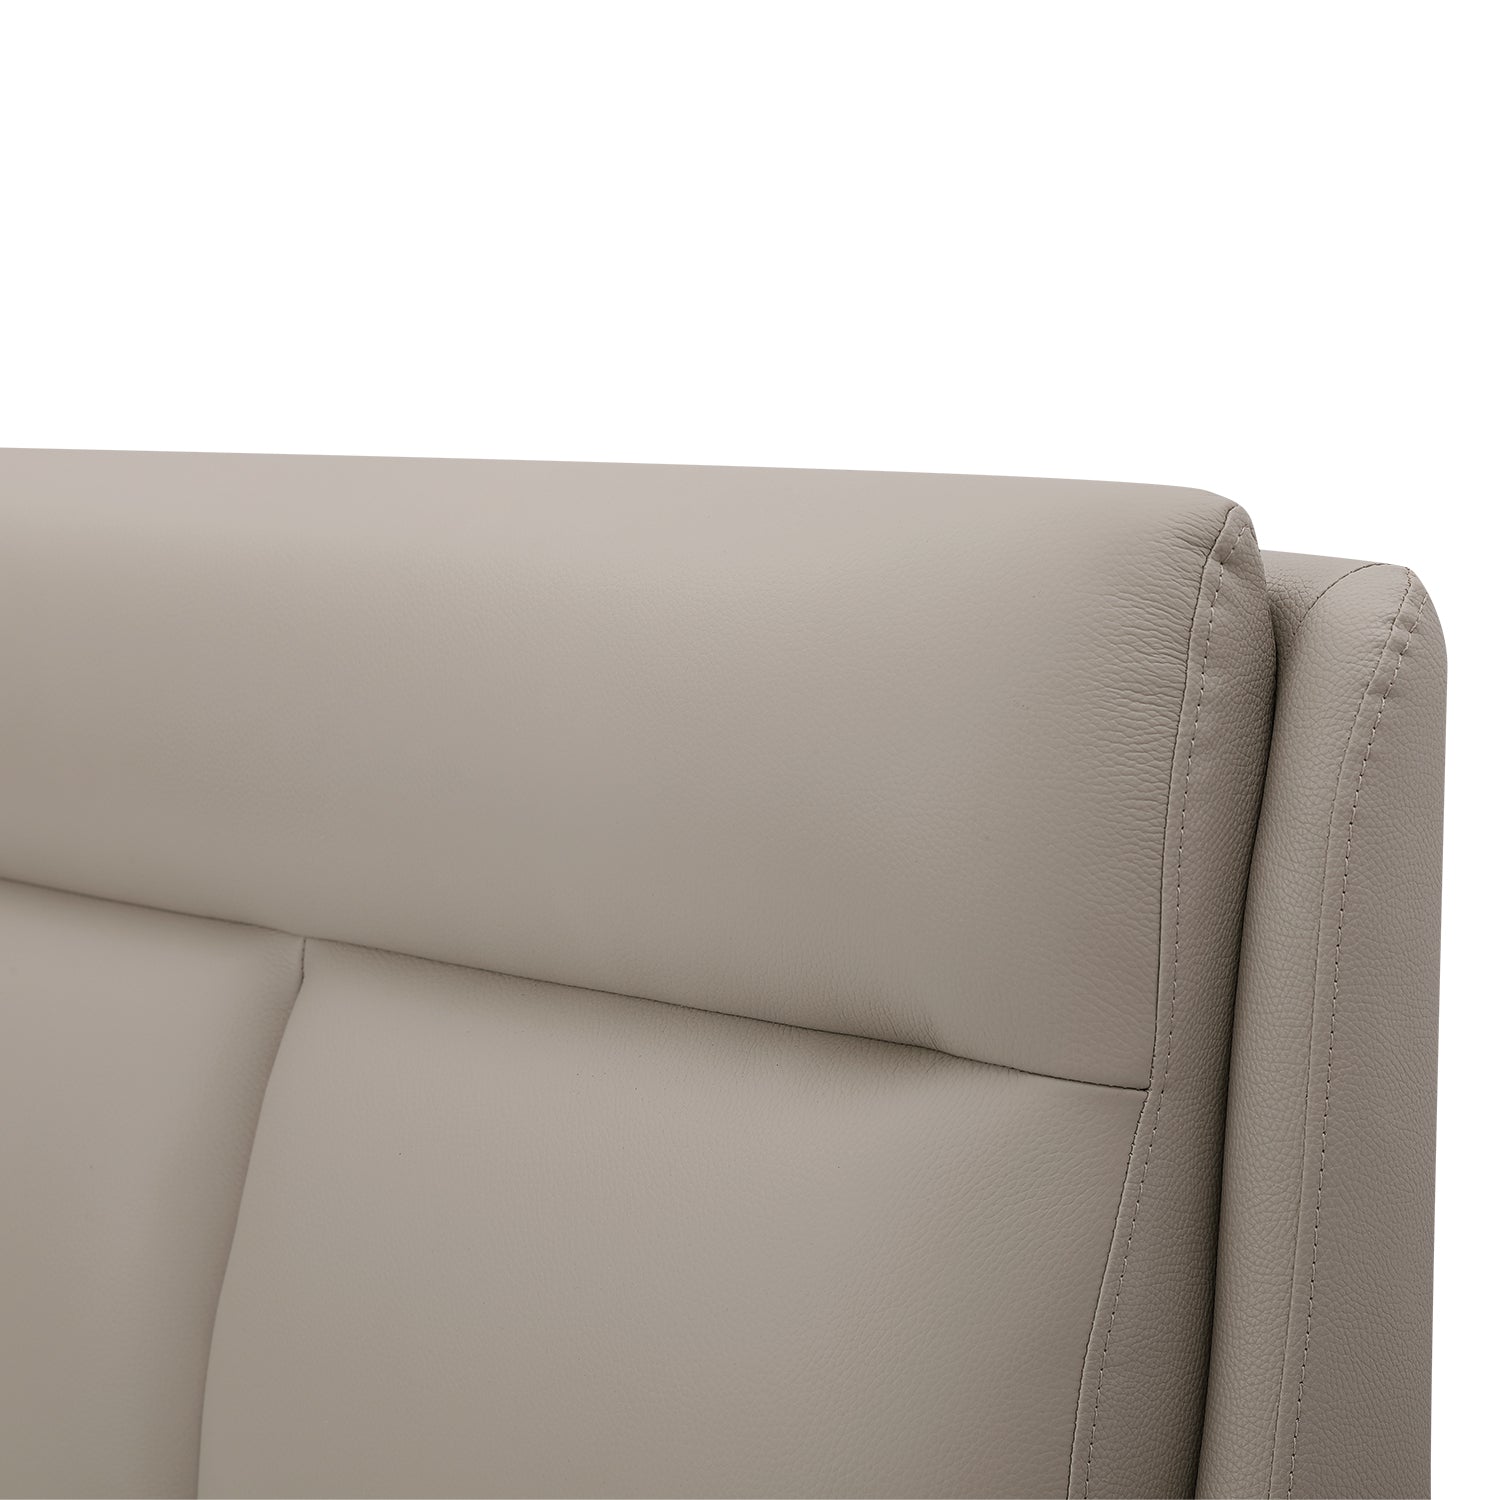 Close-up of beige leather headboard of DeRUCCI bed frame showcasing material quality and craftsmanship